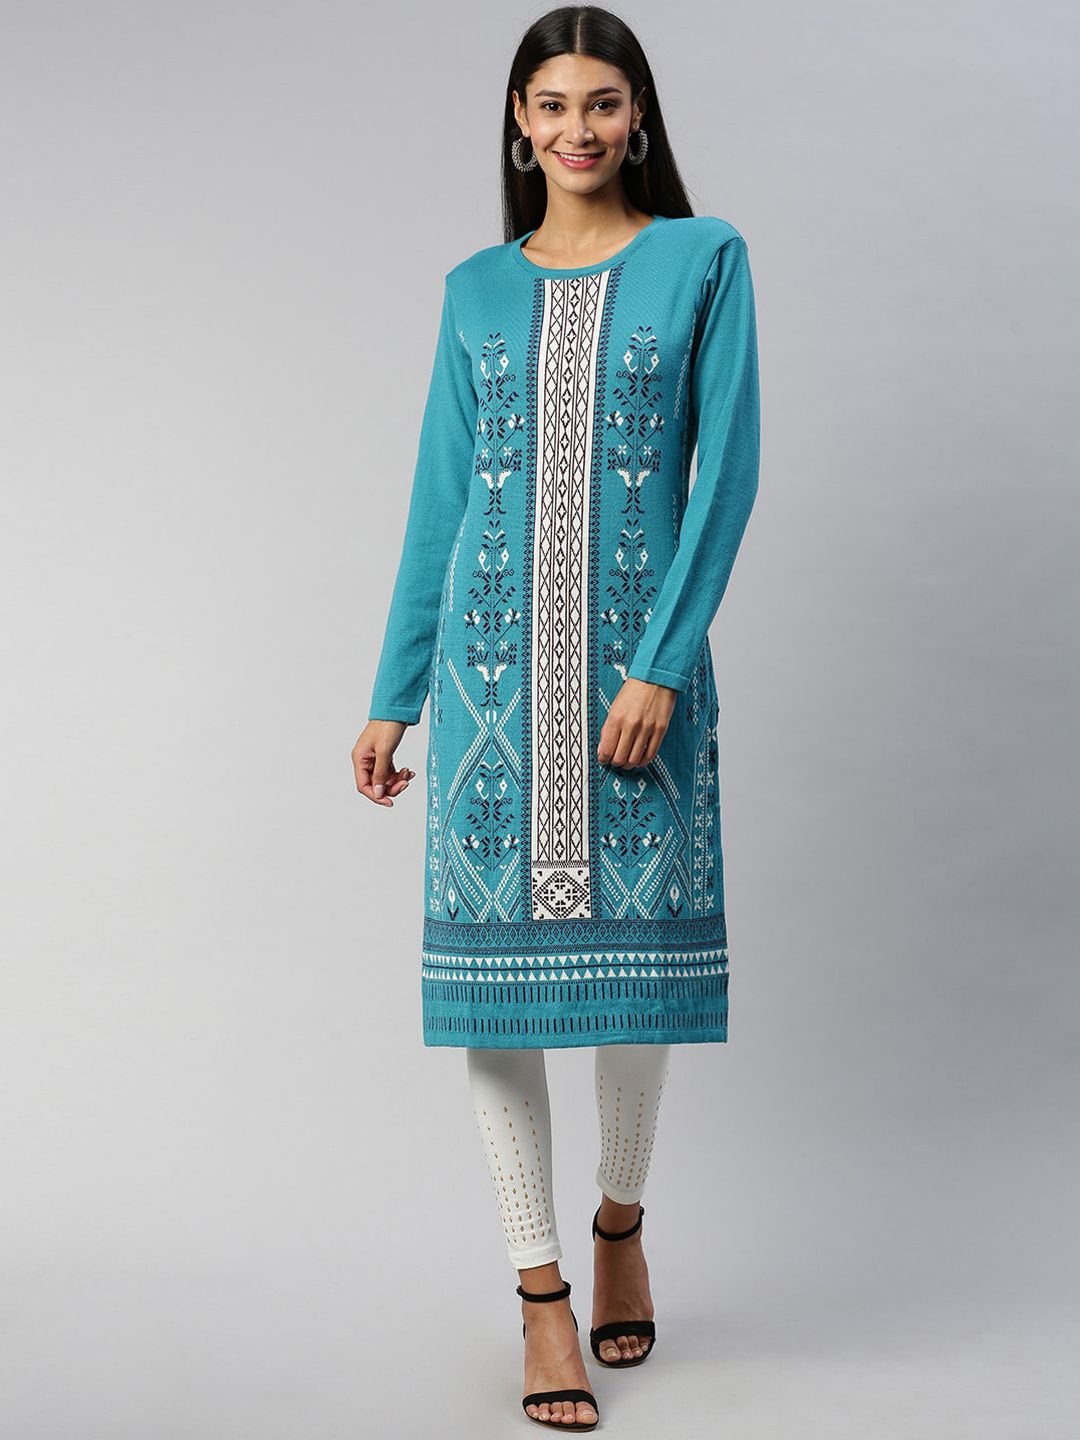 Soch Turquoise Blue Woven Design Cotton Blend Kurti Price in India